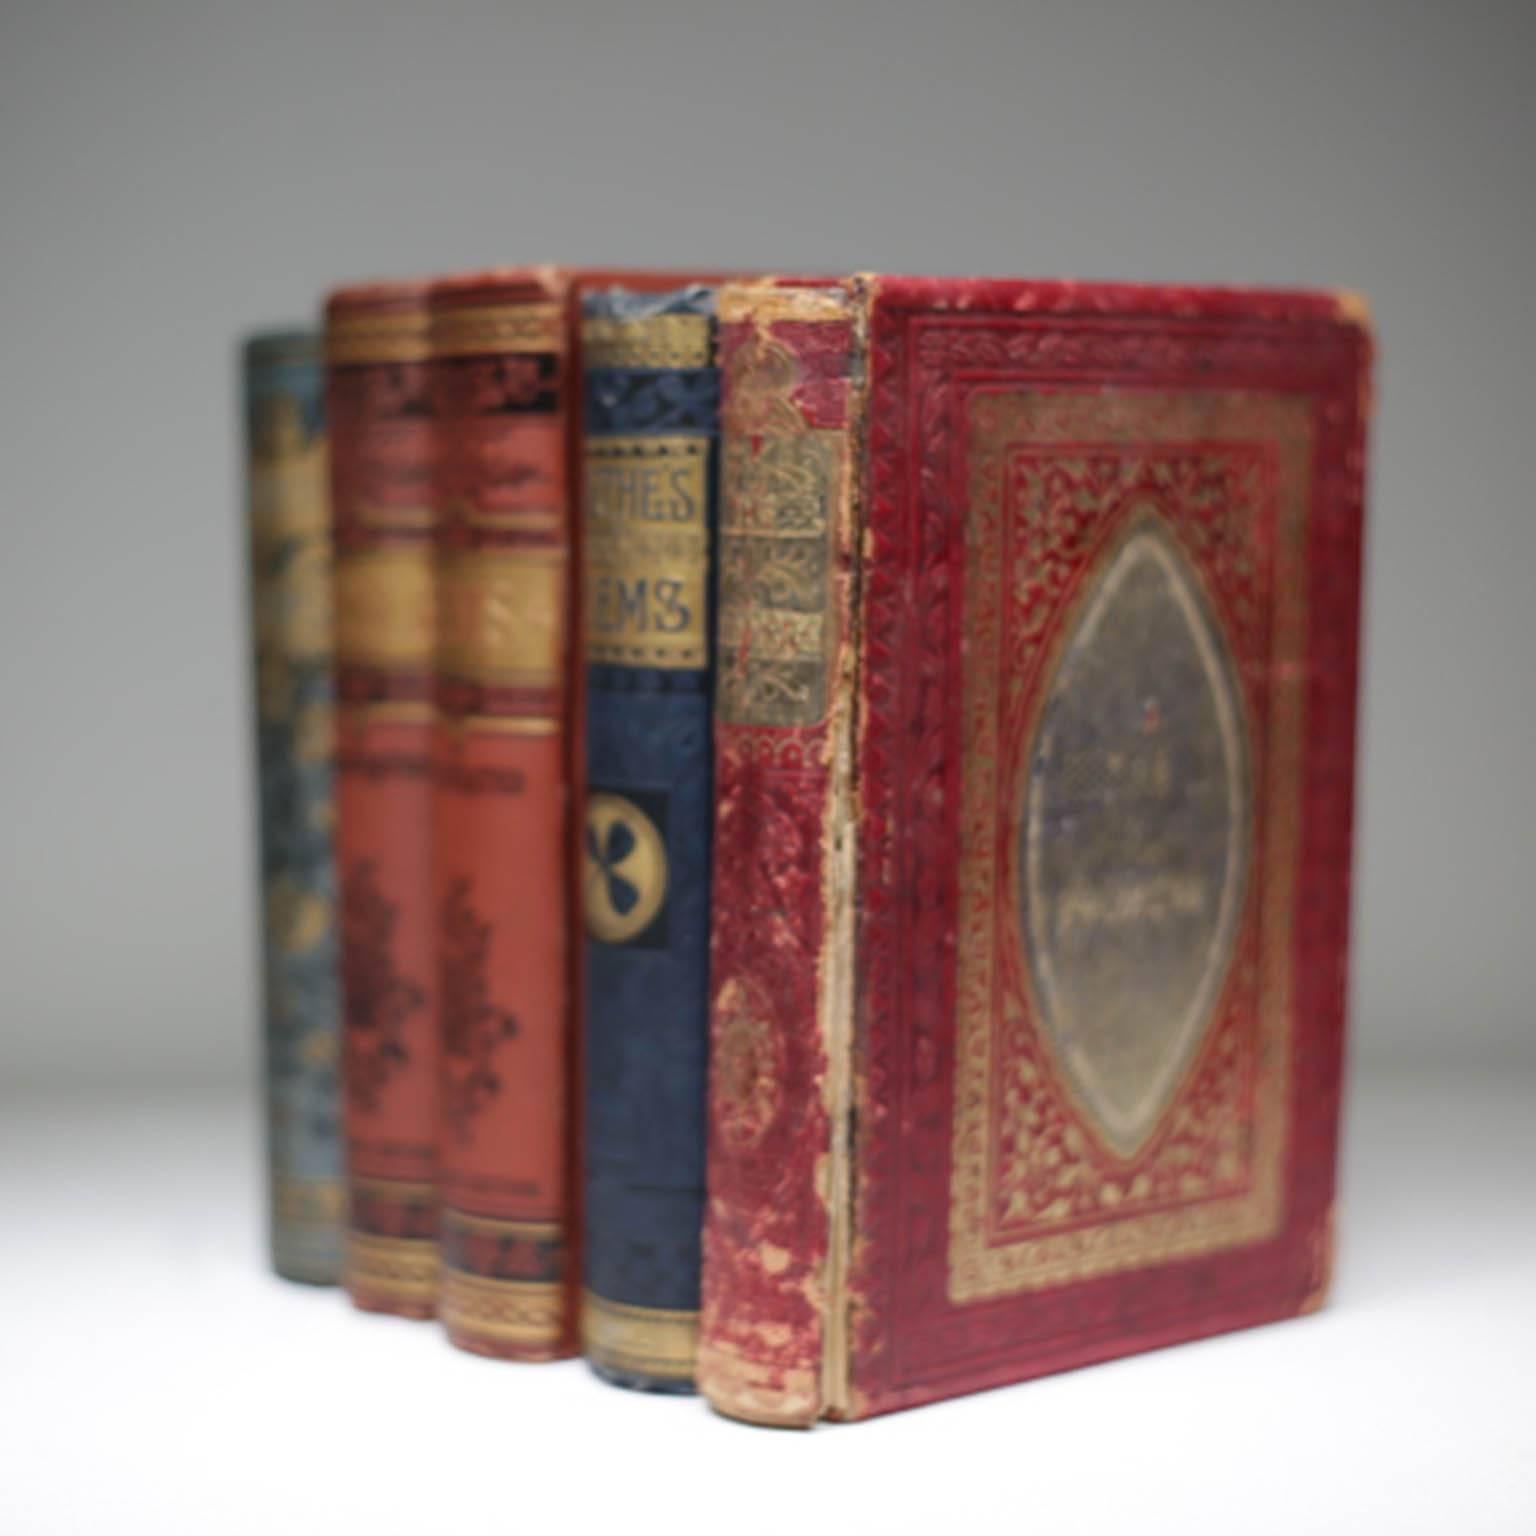 19th century set of five books, circa 1860s. Two books are signed 1861 and 1863. As gifts to someone. All the books pages are gold lined on the top, side and bottom.